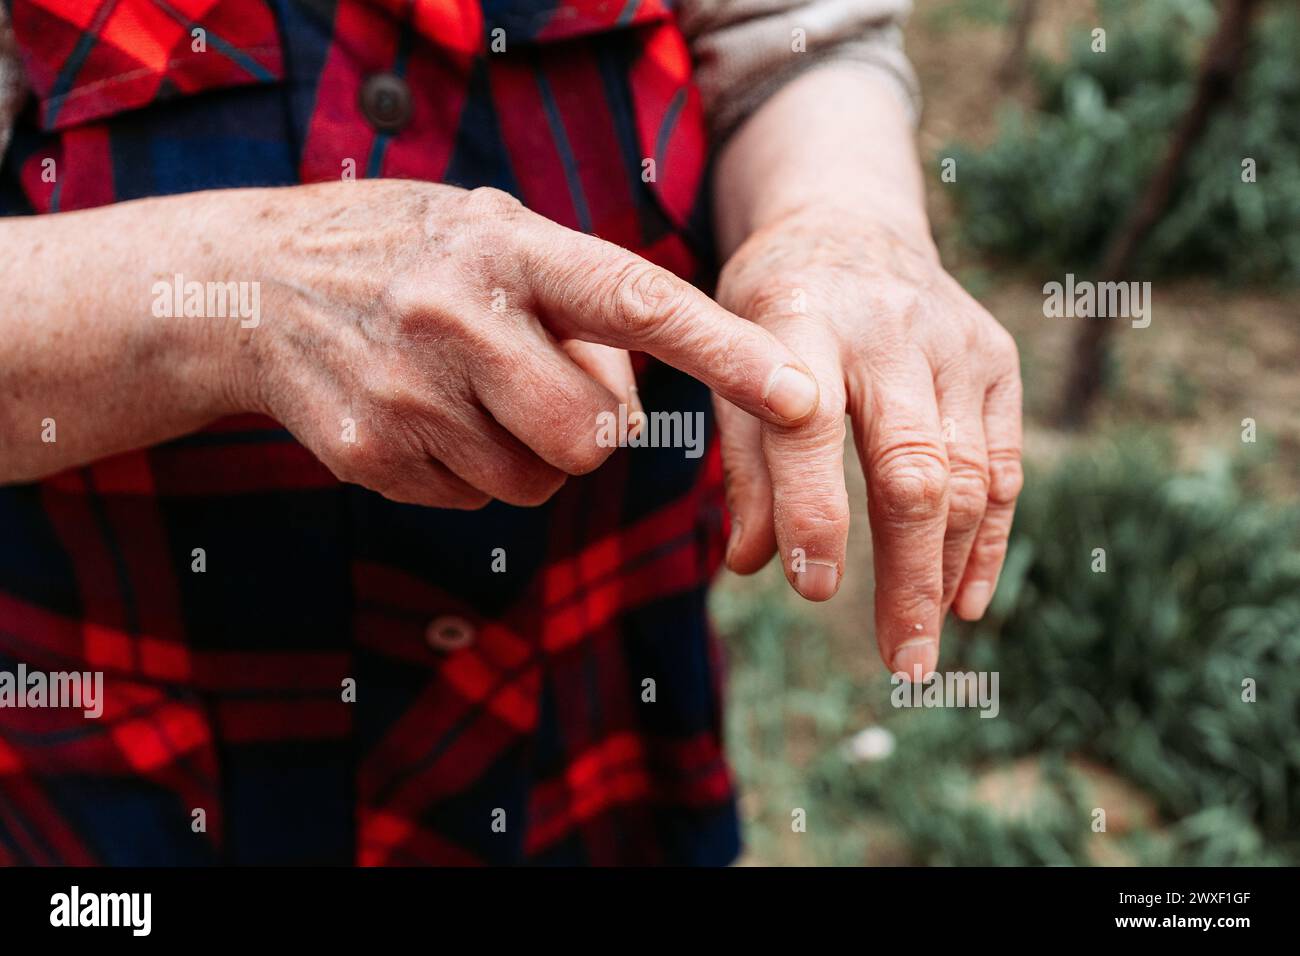 Elderly woman showing her hands joints Stock Photo